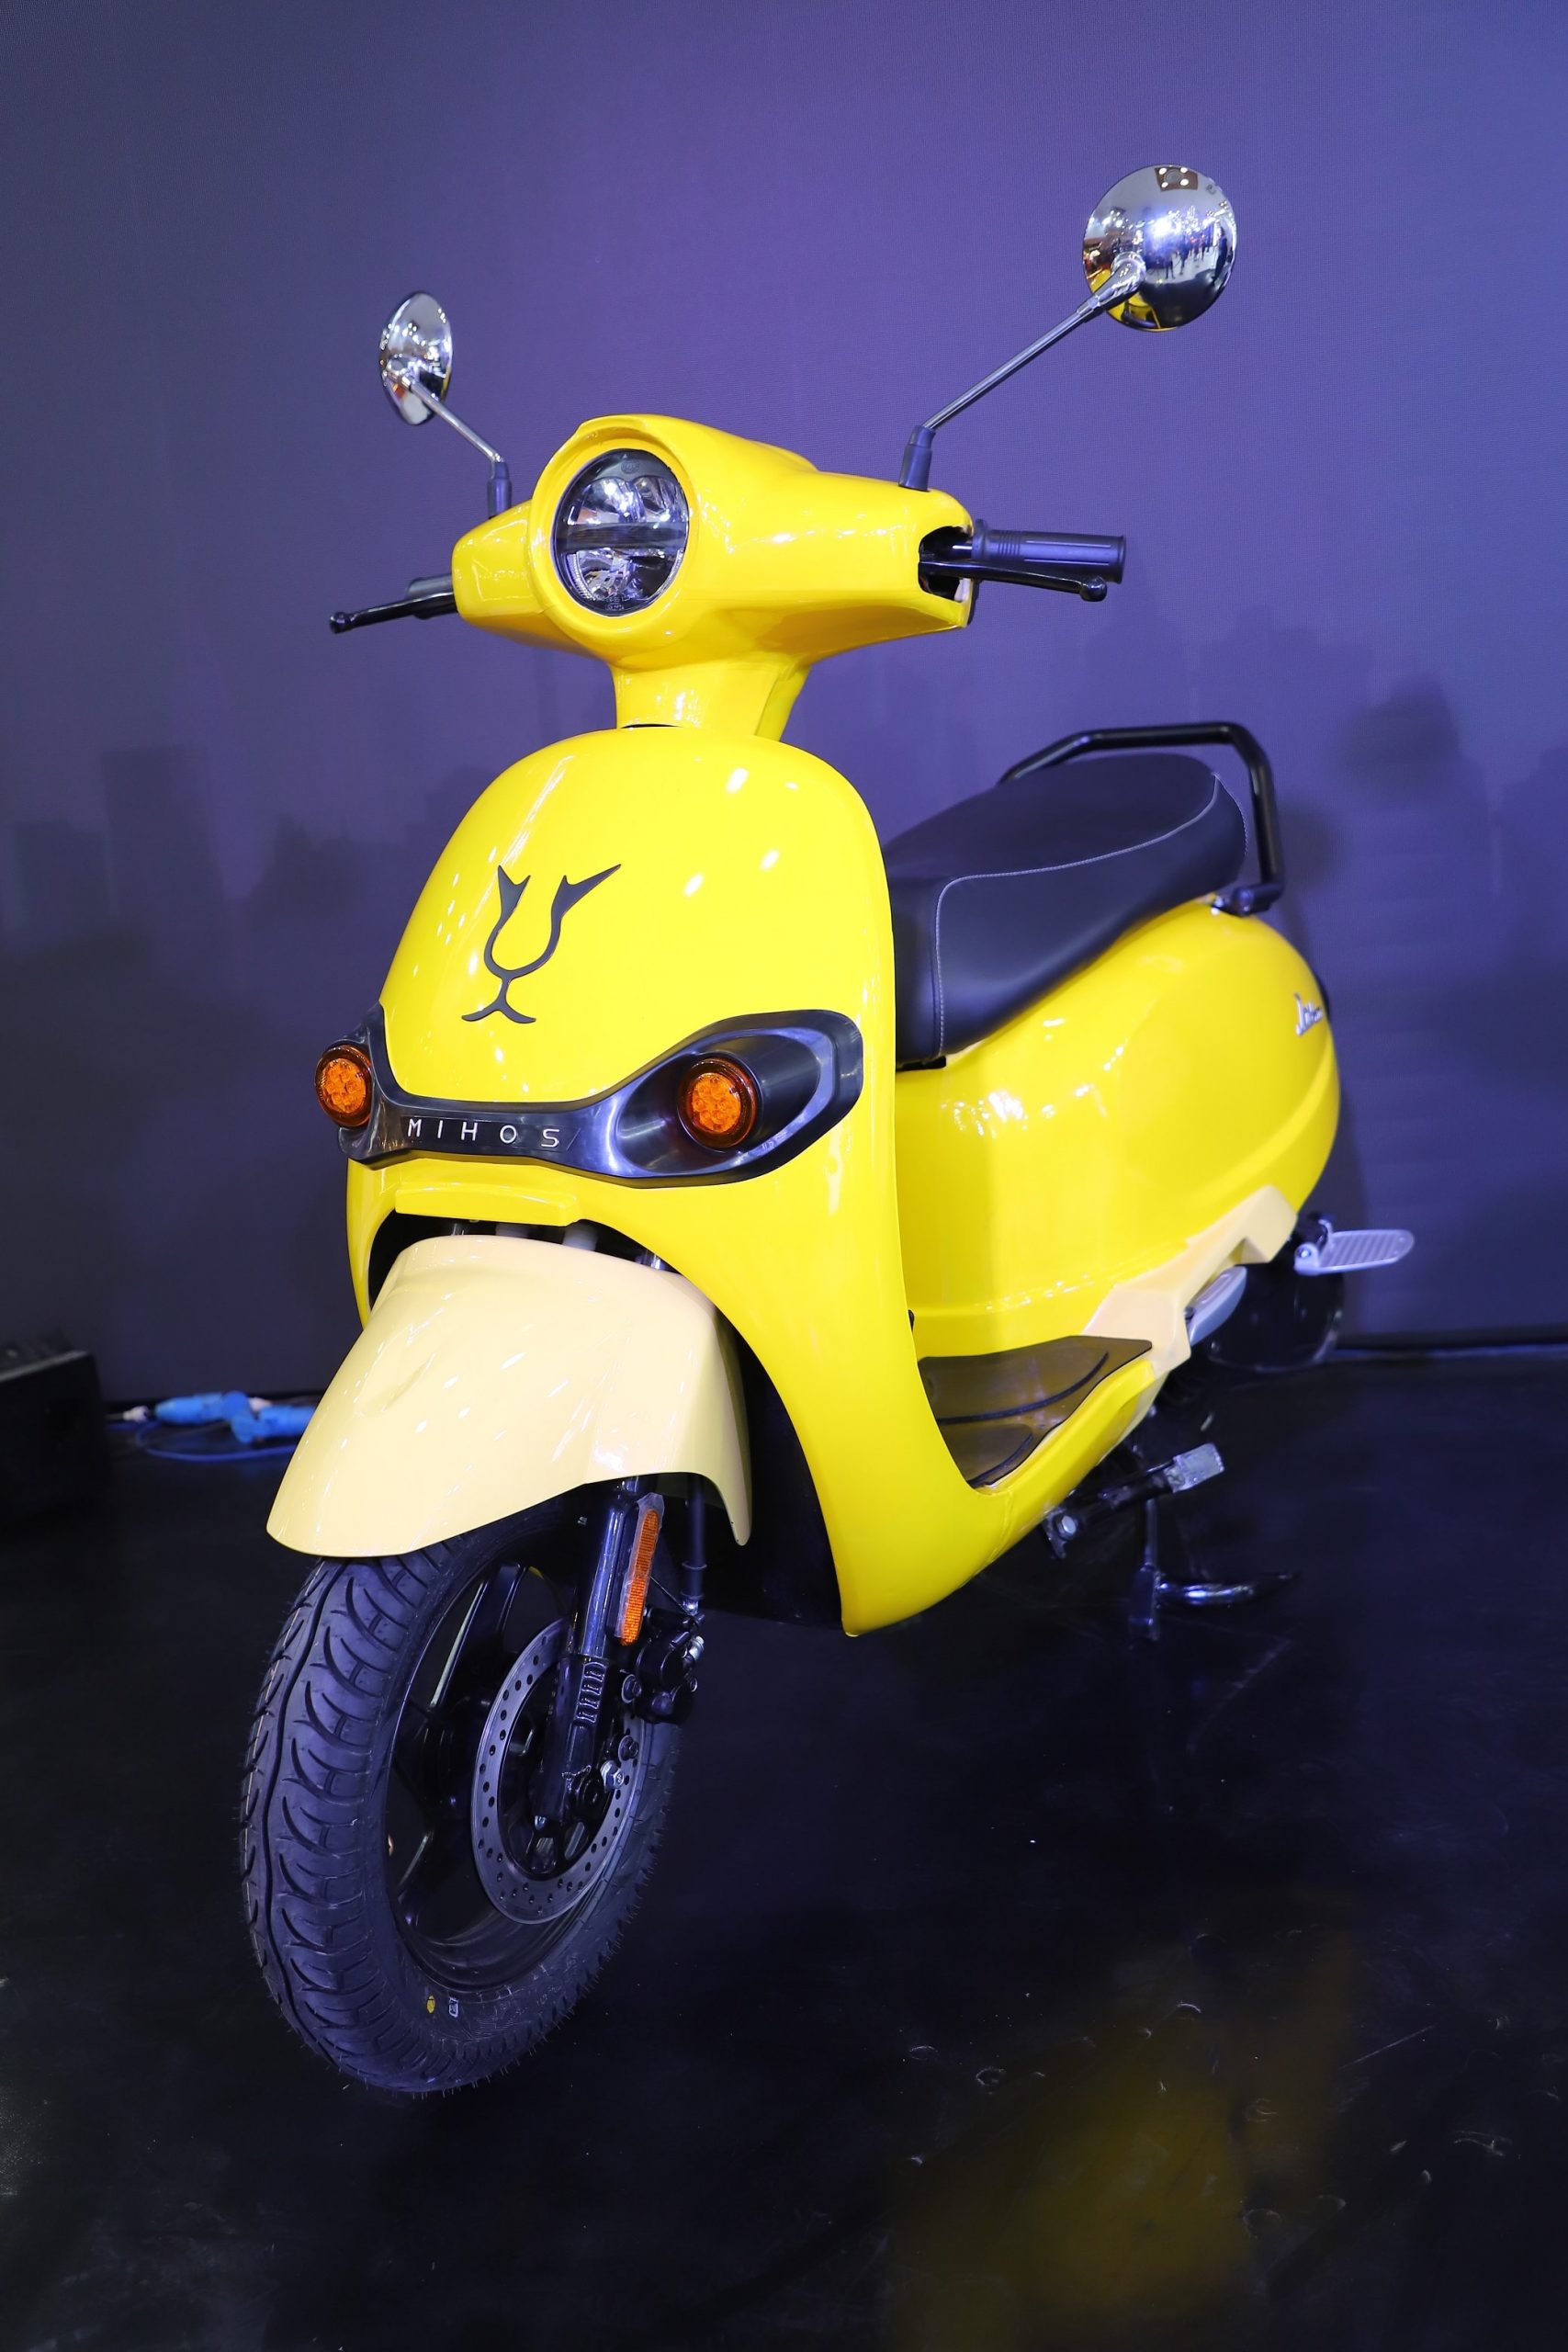 Joy opens online booking for its New Electric Scooter MIHOS - Bold Outline : India's leading Online Lifestyle, Fashion & Travel Magazine.